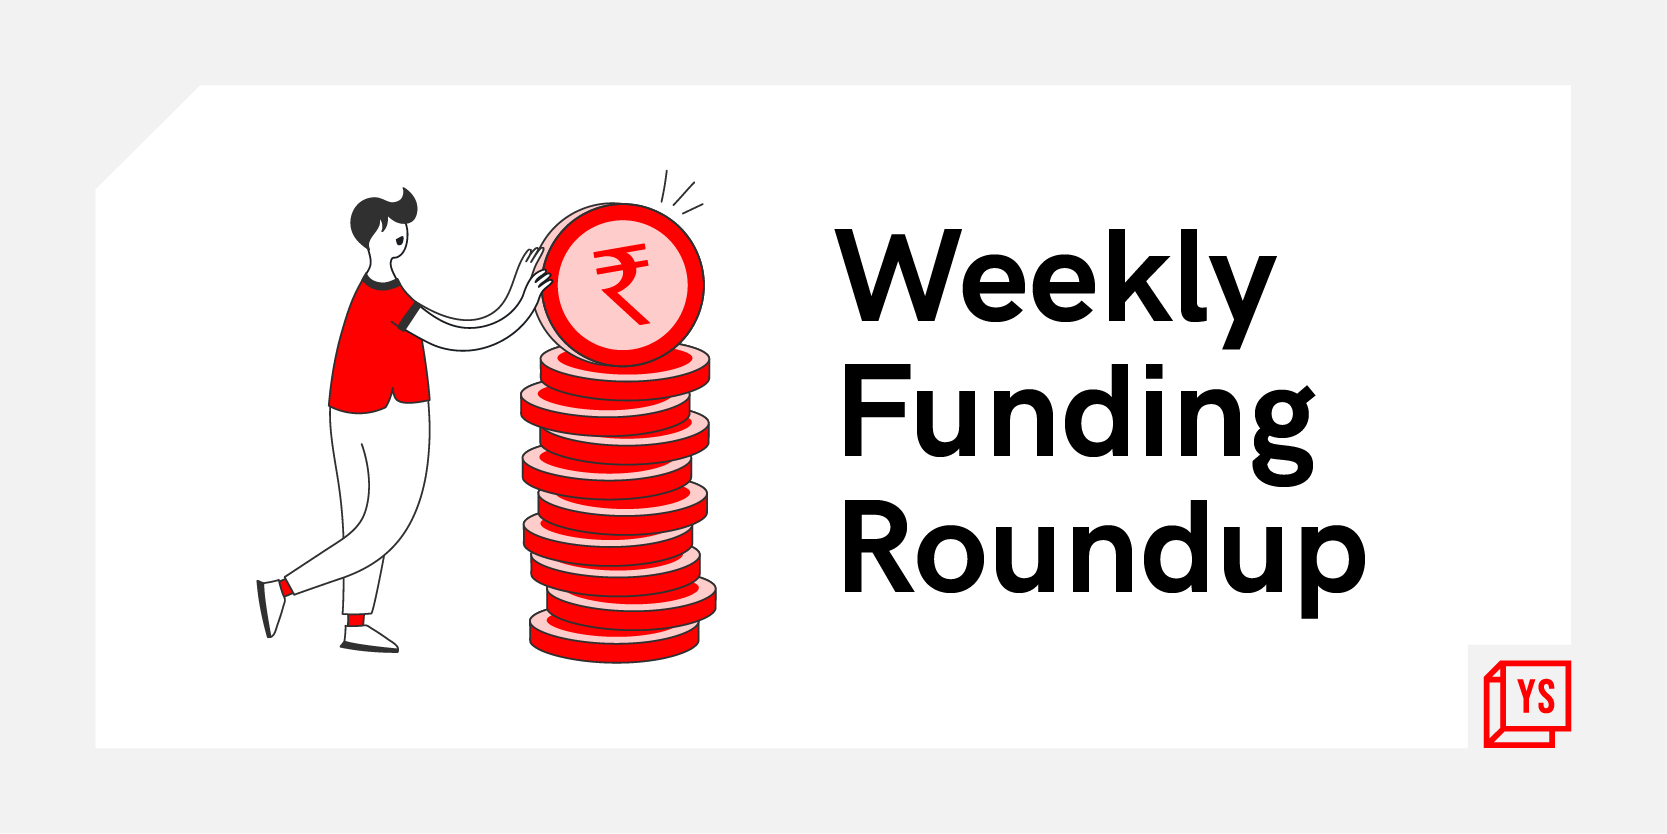 [Weekly funding roundup July 25-29] July ends with 'funding winter' looming